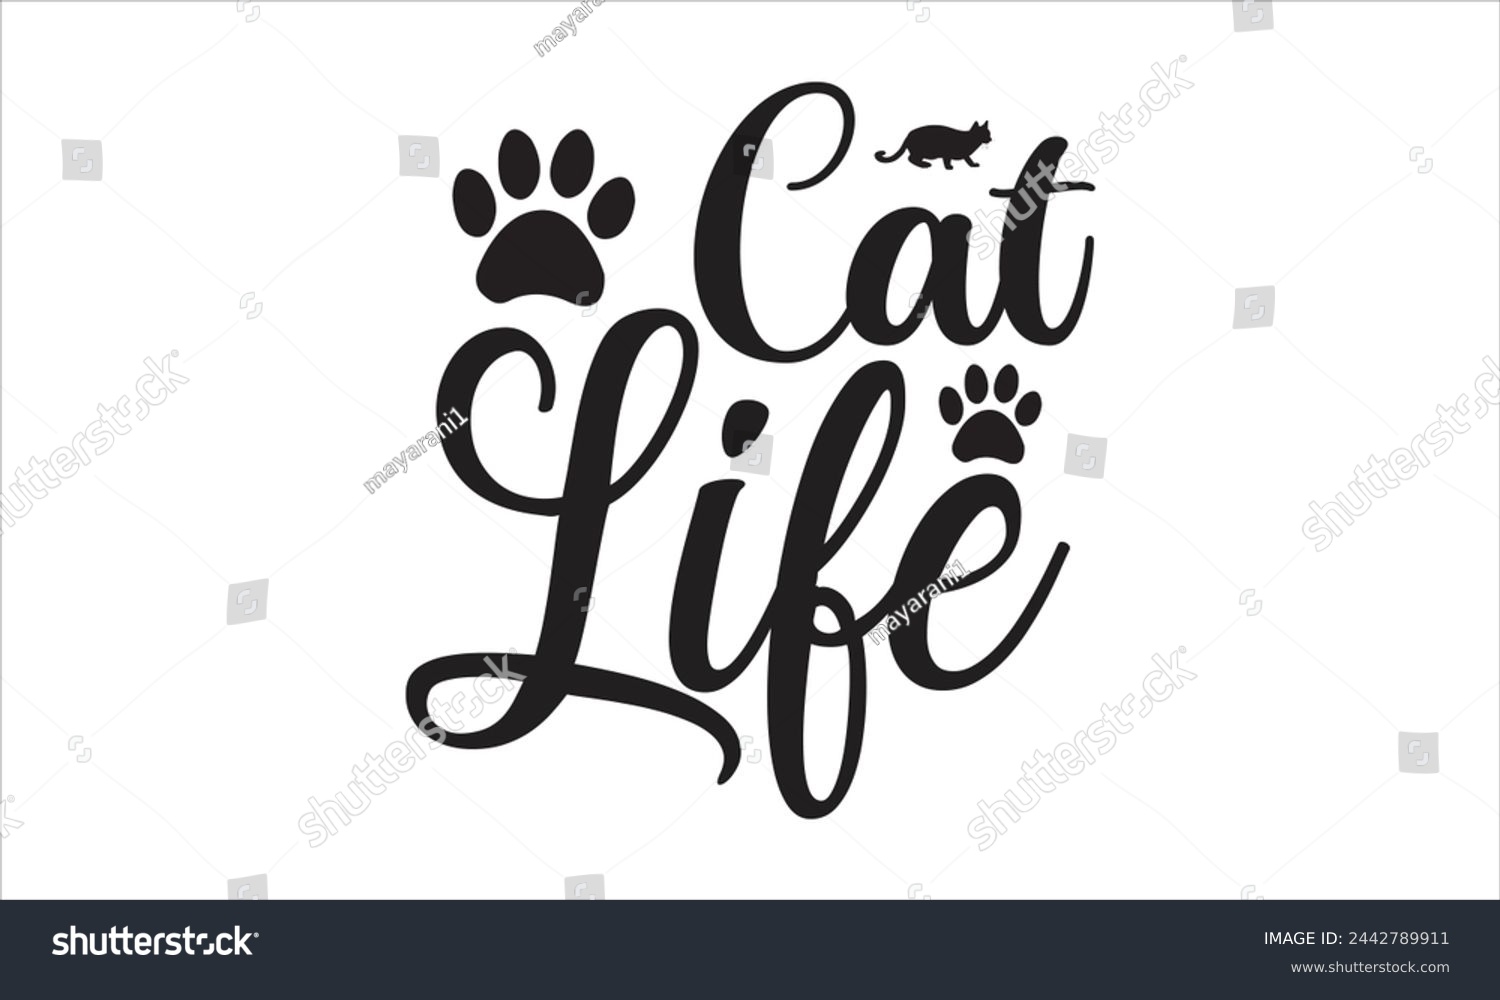 SVG of Cat Quotes Bundle, Cats Svg,funny Motivational typography t shirt design bundle,vector art,animal shirt,silhouette,png,eps,illustration isolated on white background,Lettering Illustration,Pet life,sti svg